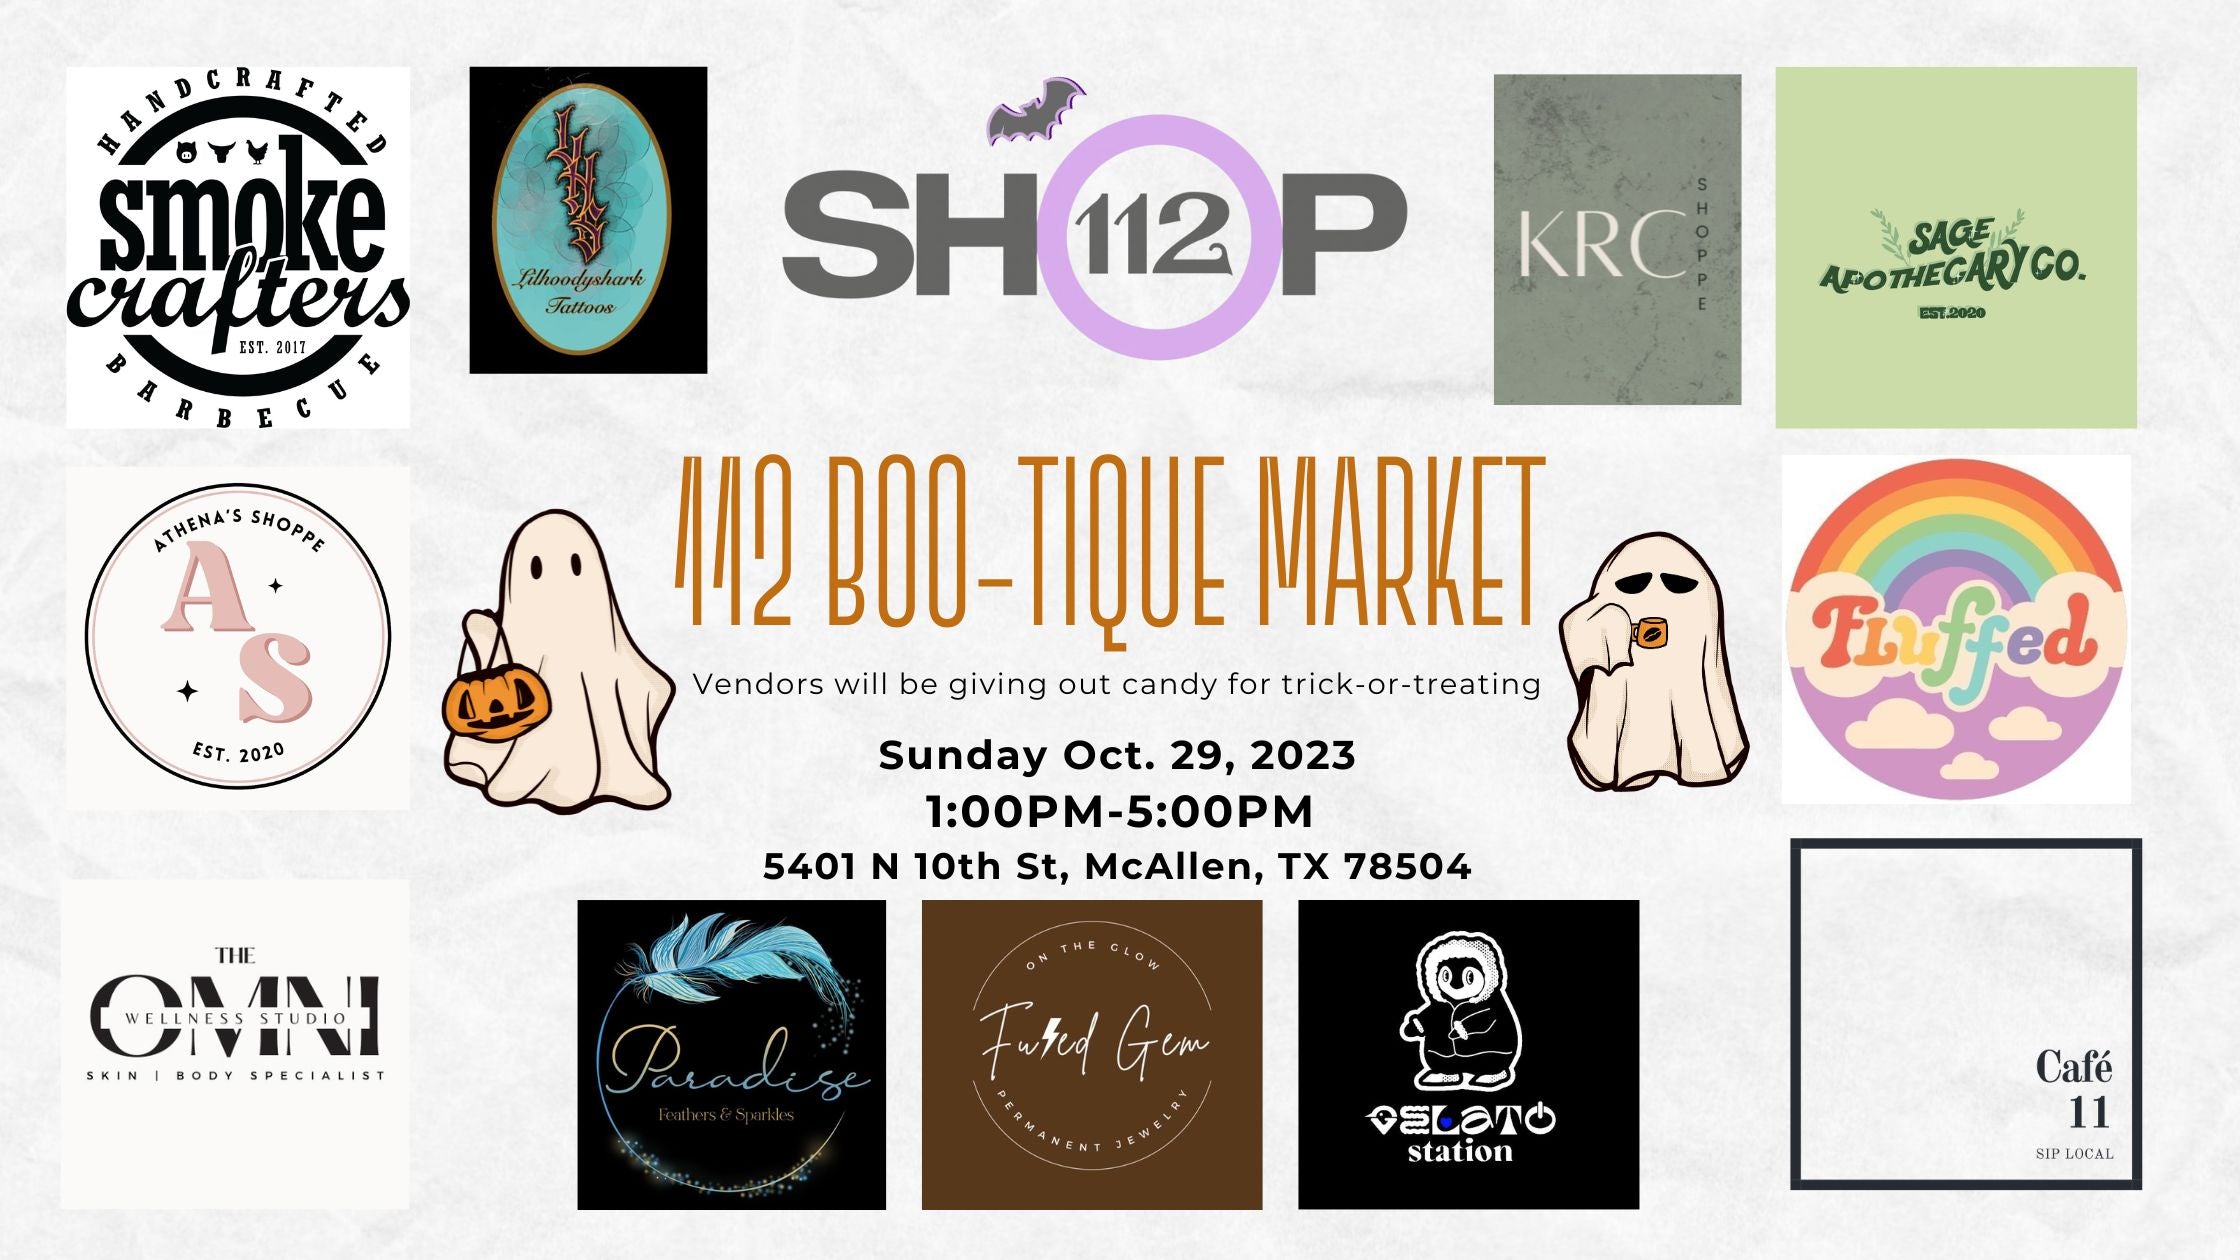 It's Halloween: Come Out & Shop the 112 Boo-tique Market!